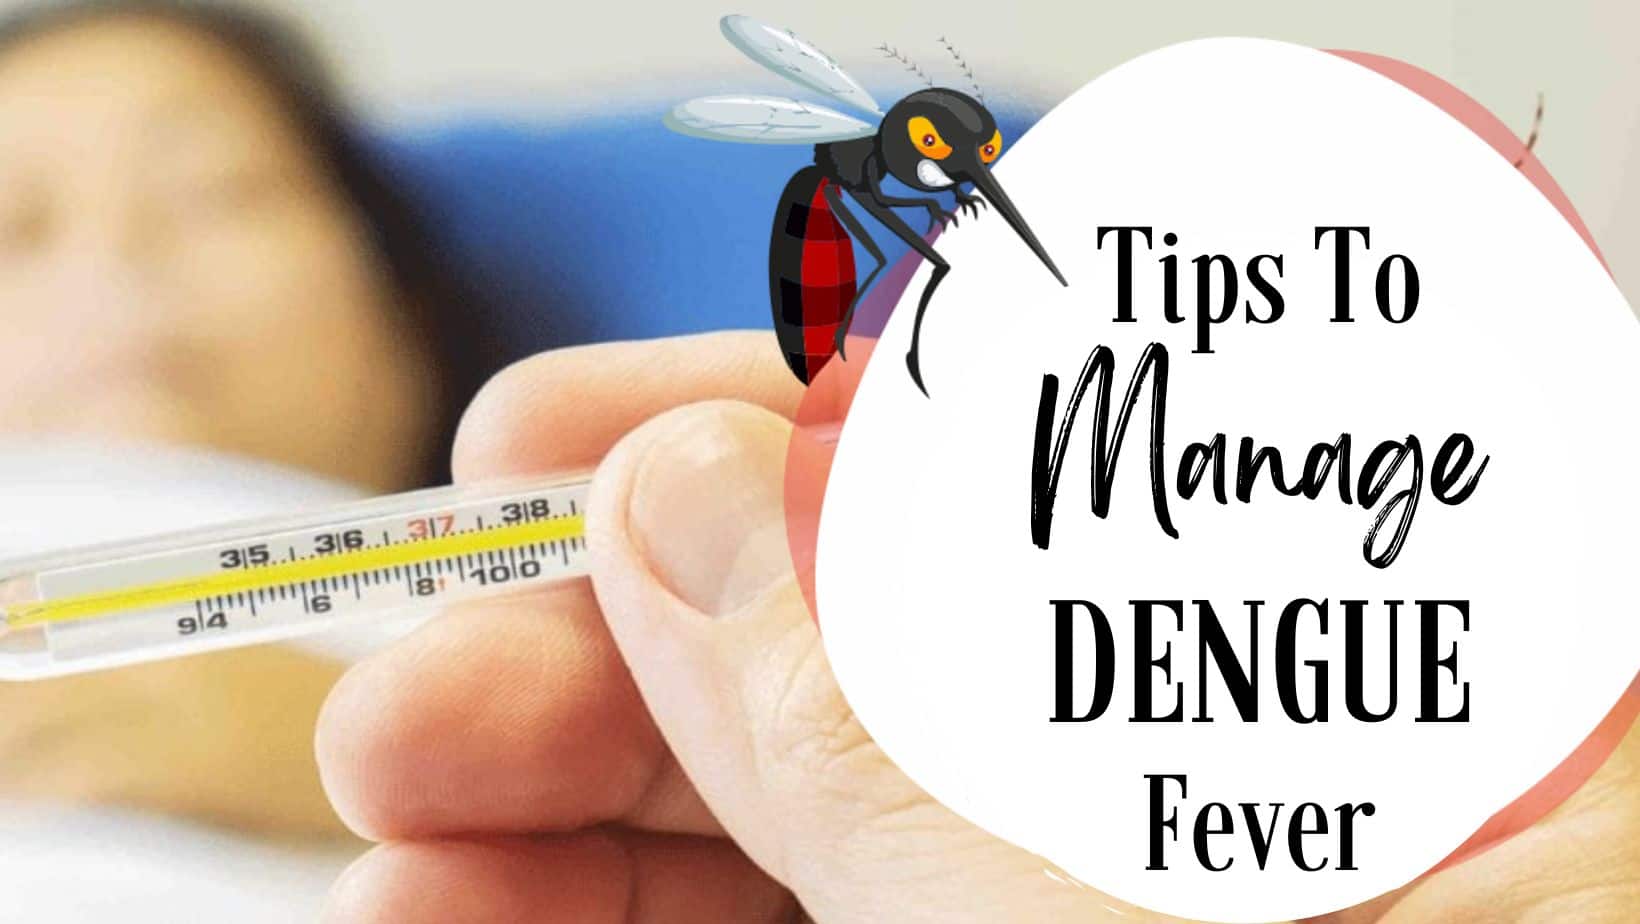 Dengue Fever: 5 Ayurvedic Home Remedies That Might Help In Managing The Symptoms